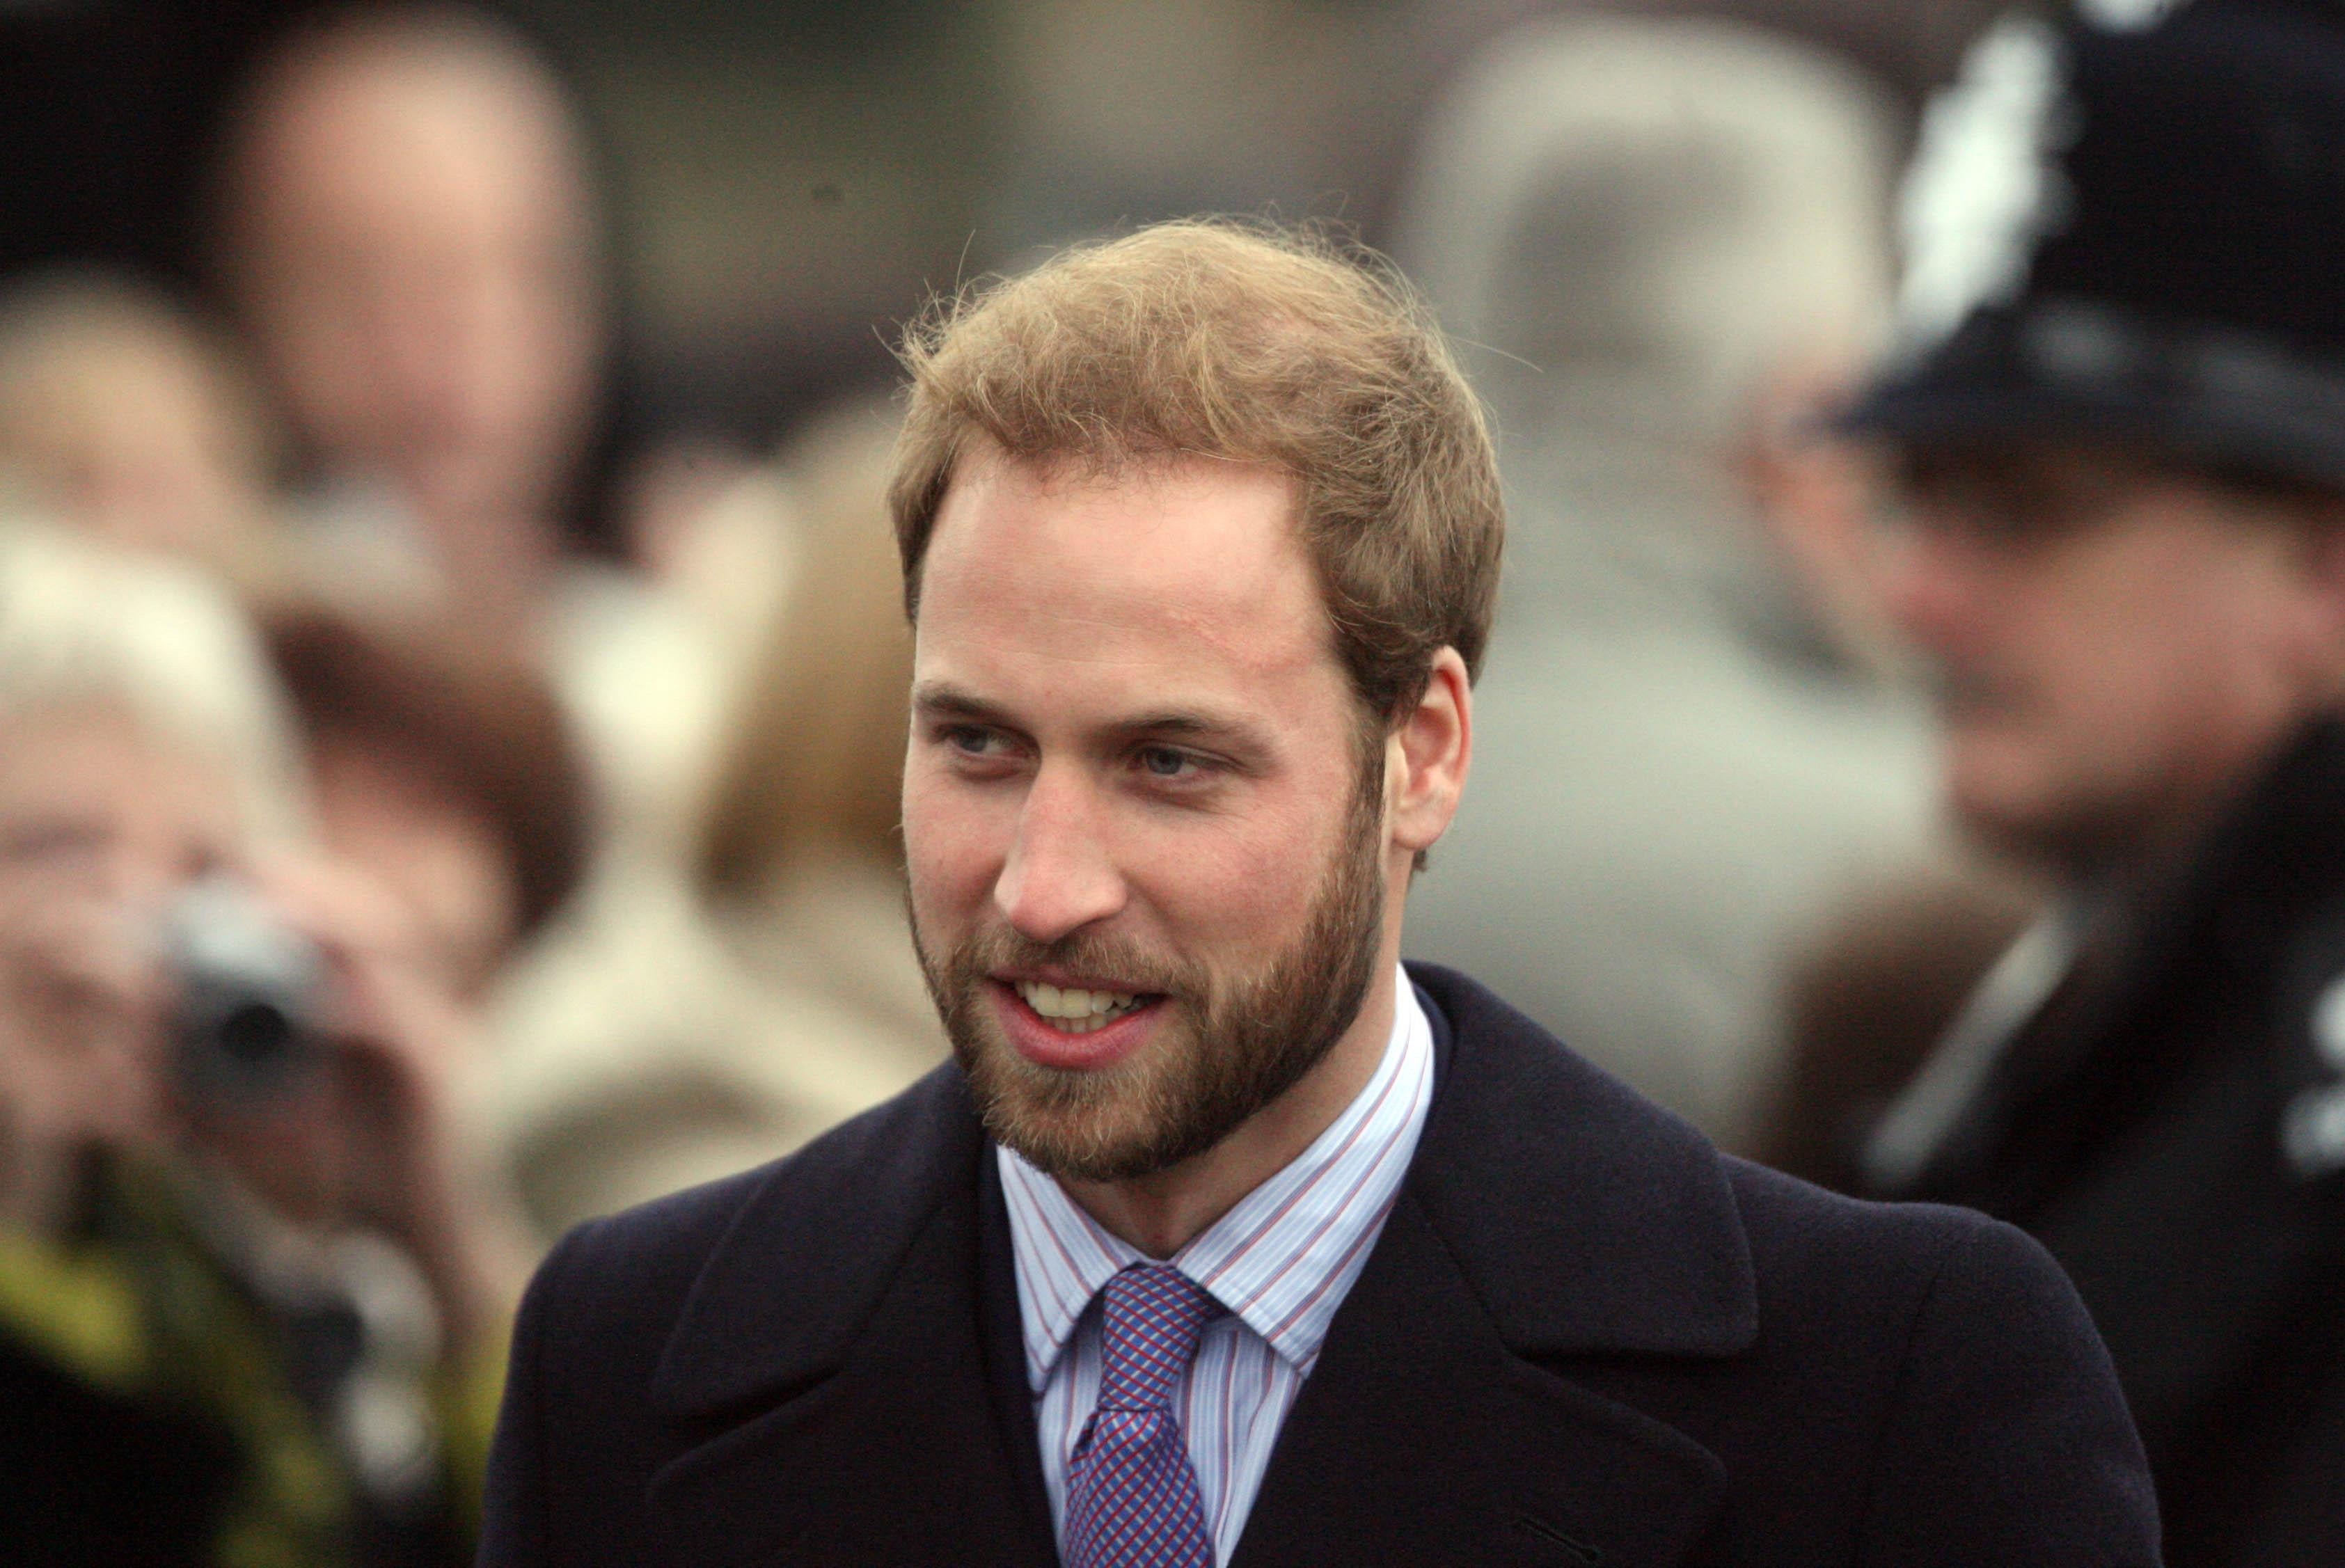 Prince William arrives at St Mary Magdalene Church on the Queen’s Sandringham estate for Christmas Day church service in 2008